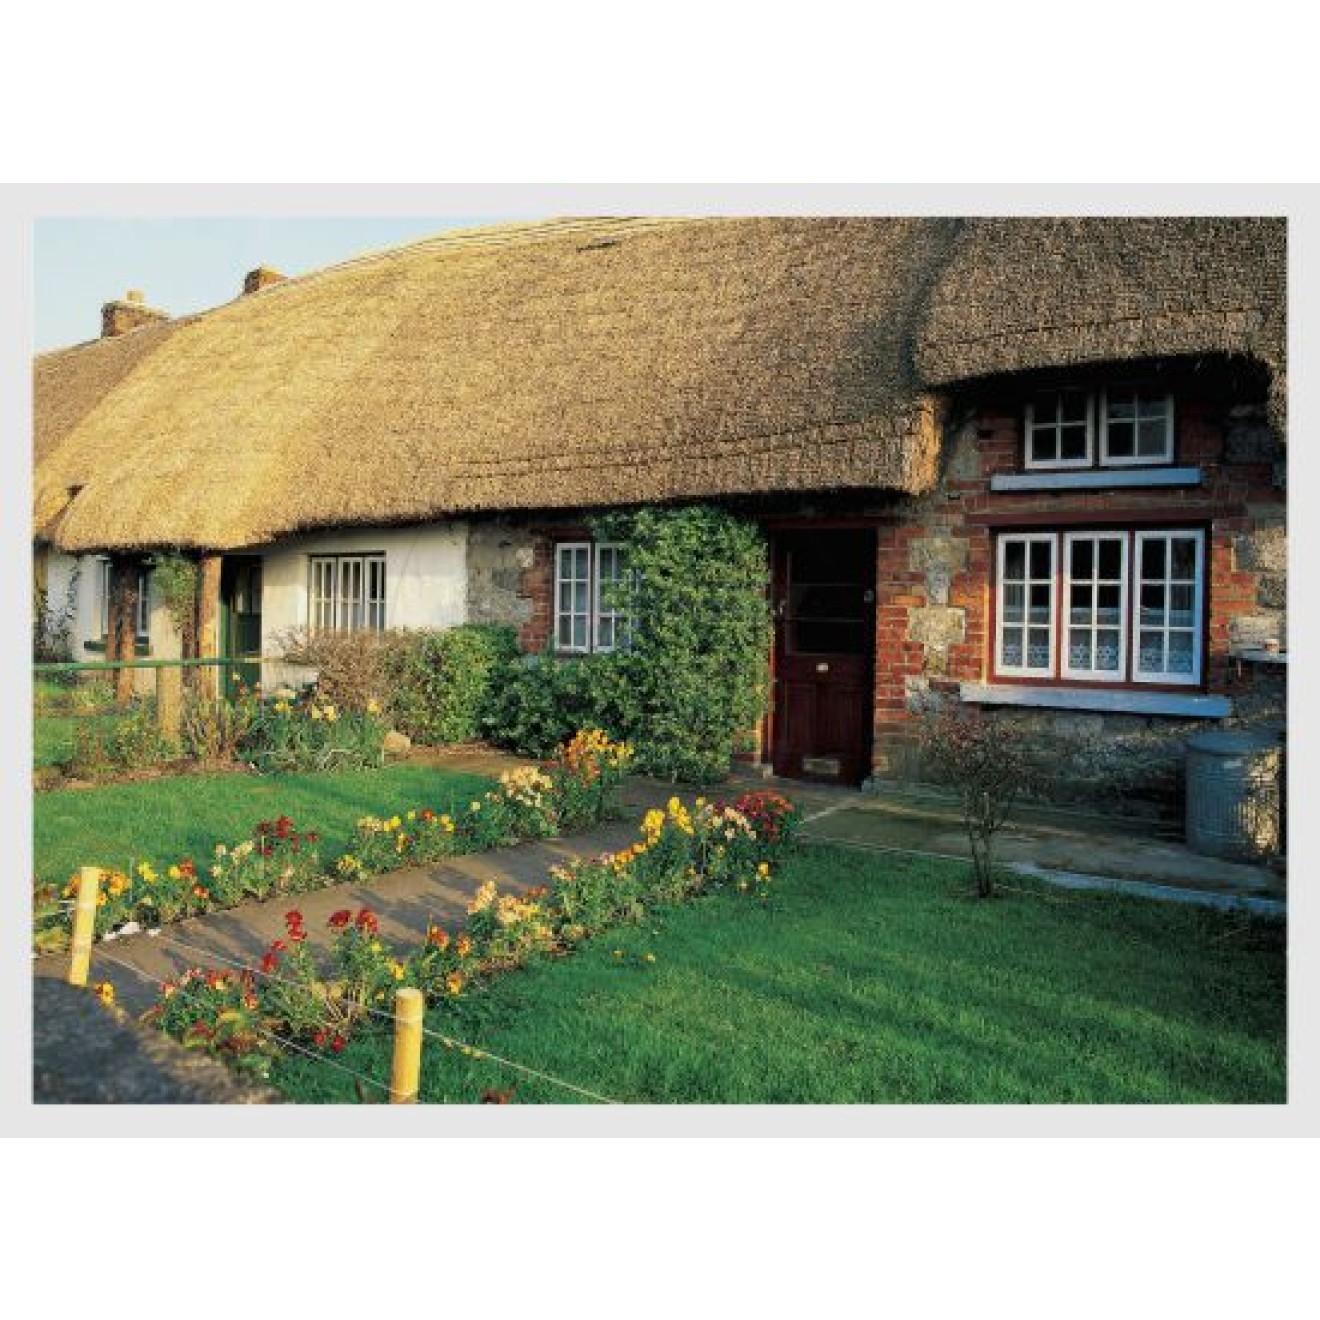 House with thatched roof